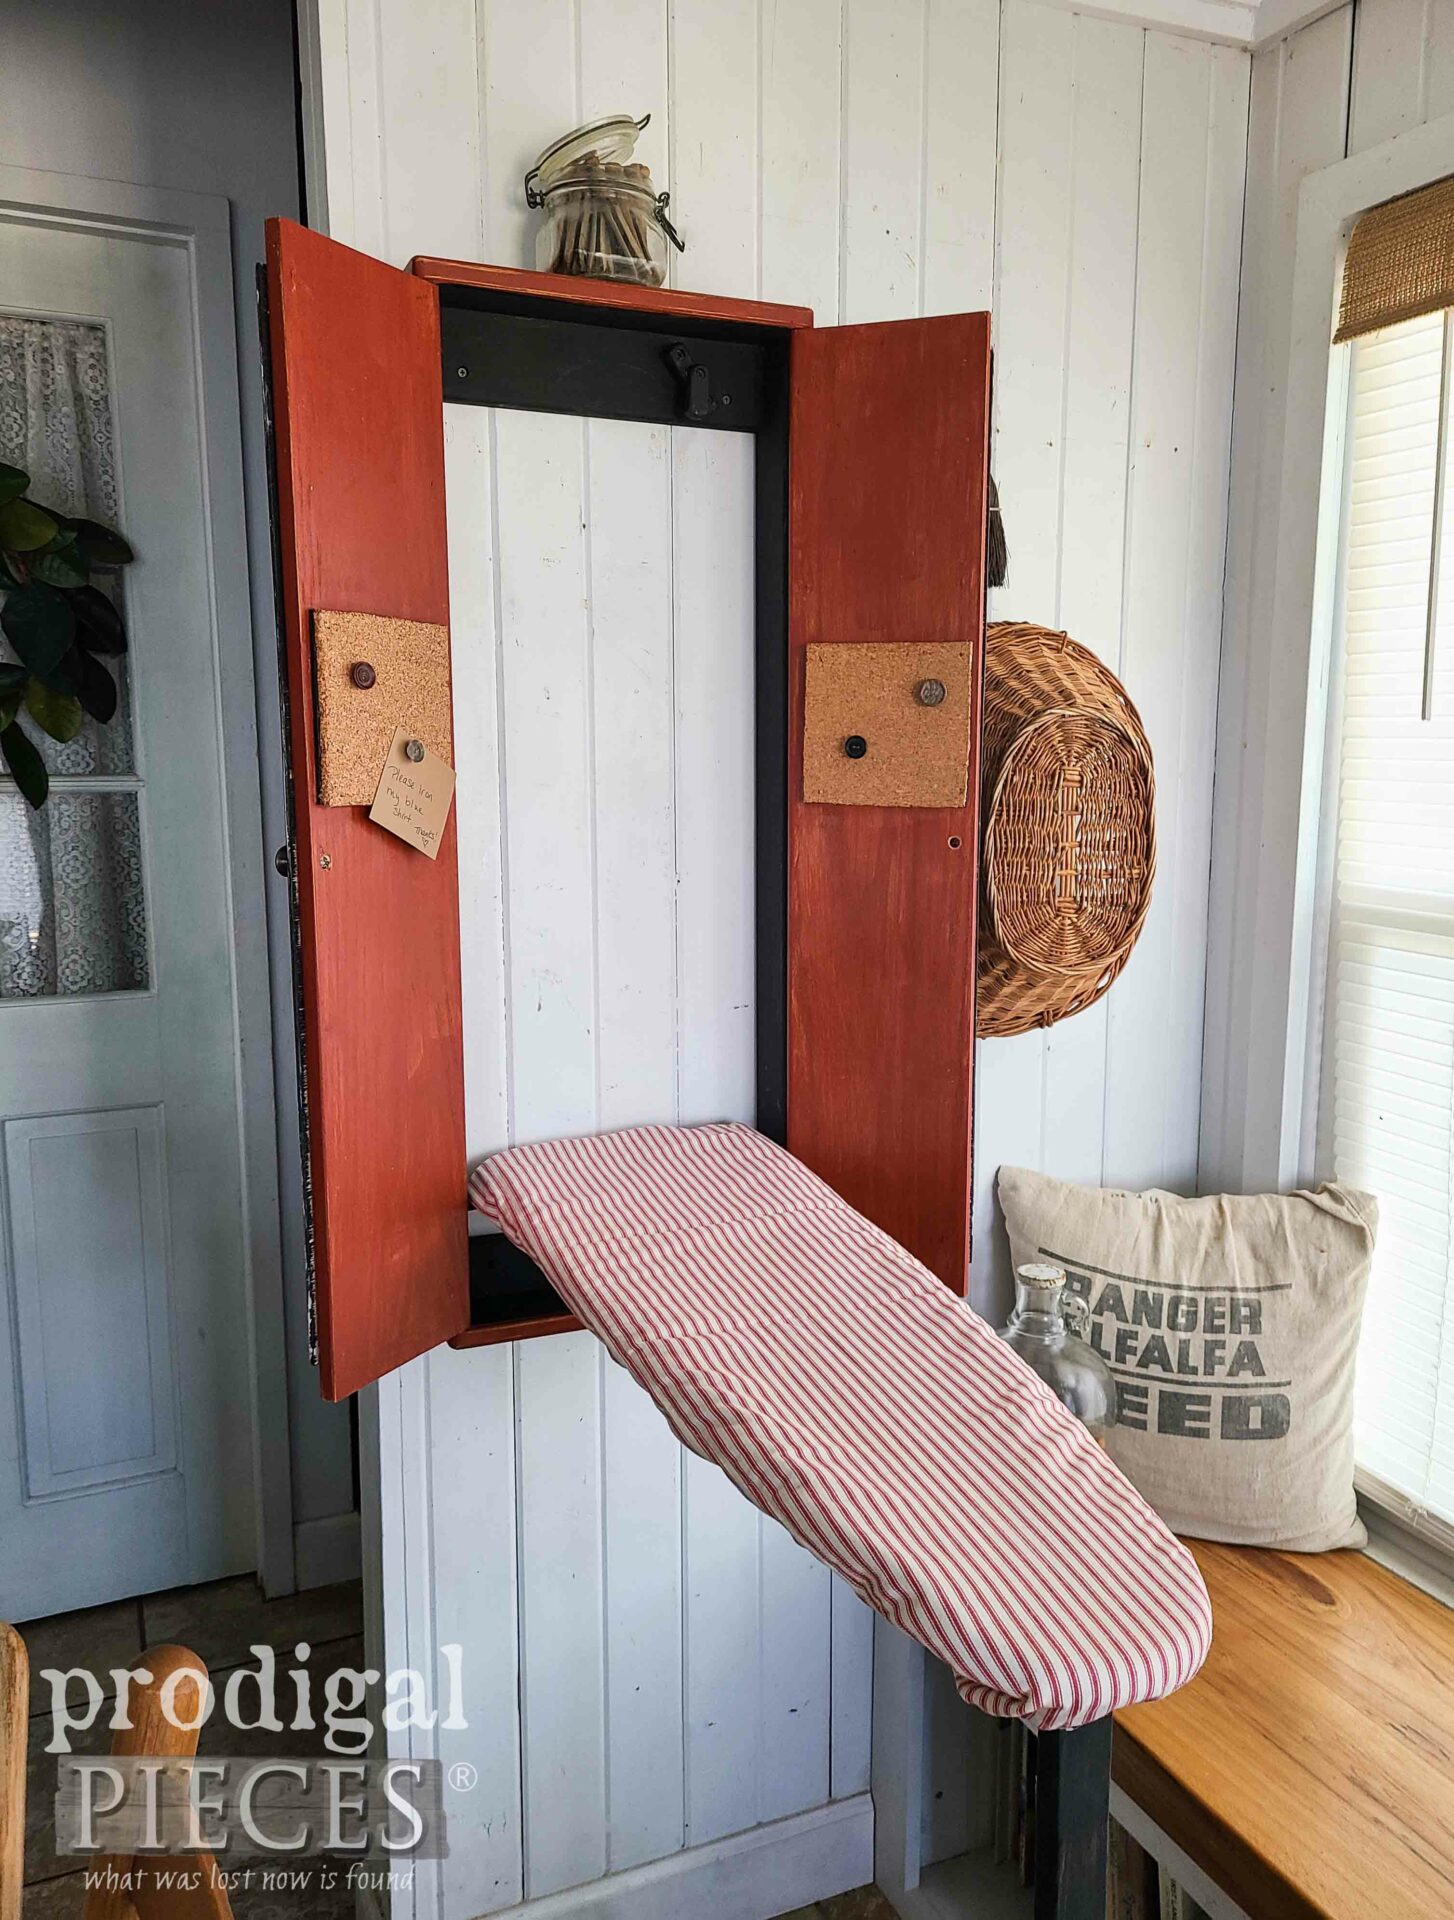 DIY Fold-Out Wall Mounted Ironing Board by Larissa of Prodigal Pieces | prodigalpieces.com #prodigalpieces #diy #farmhouse #laundry